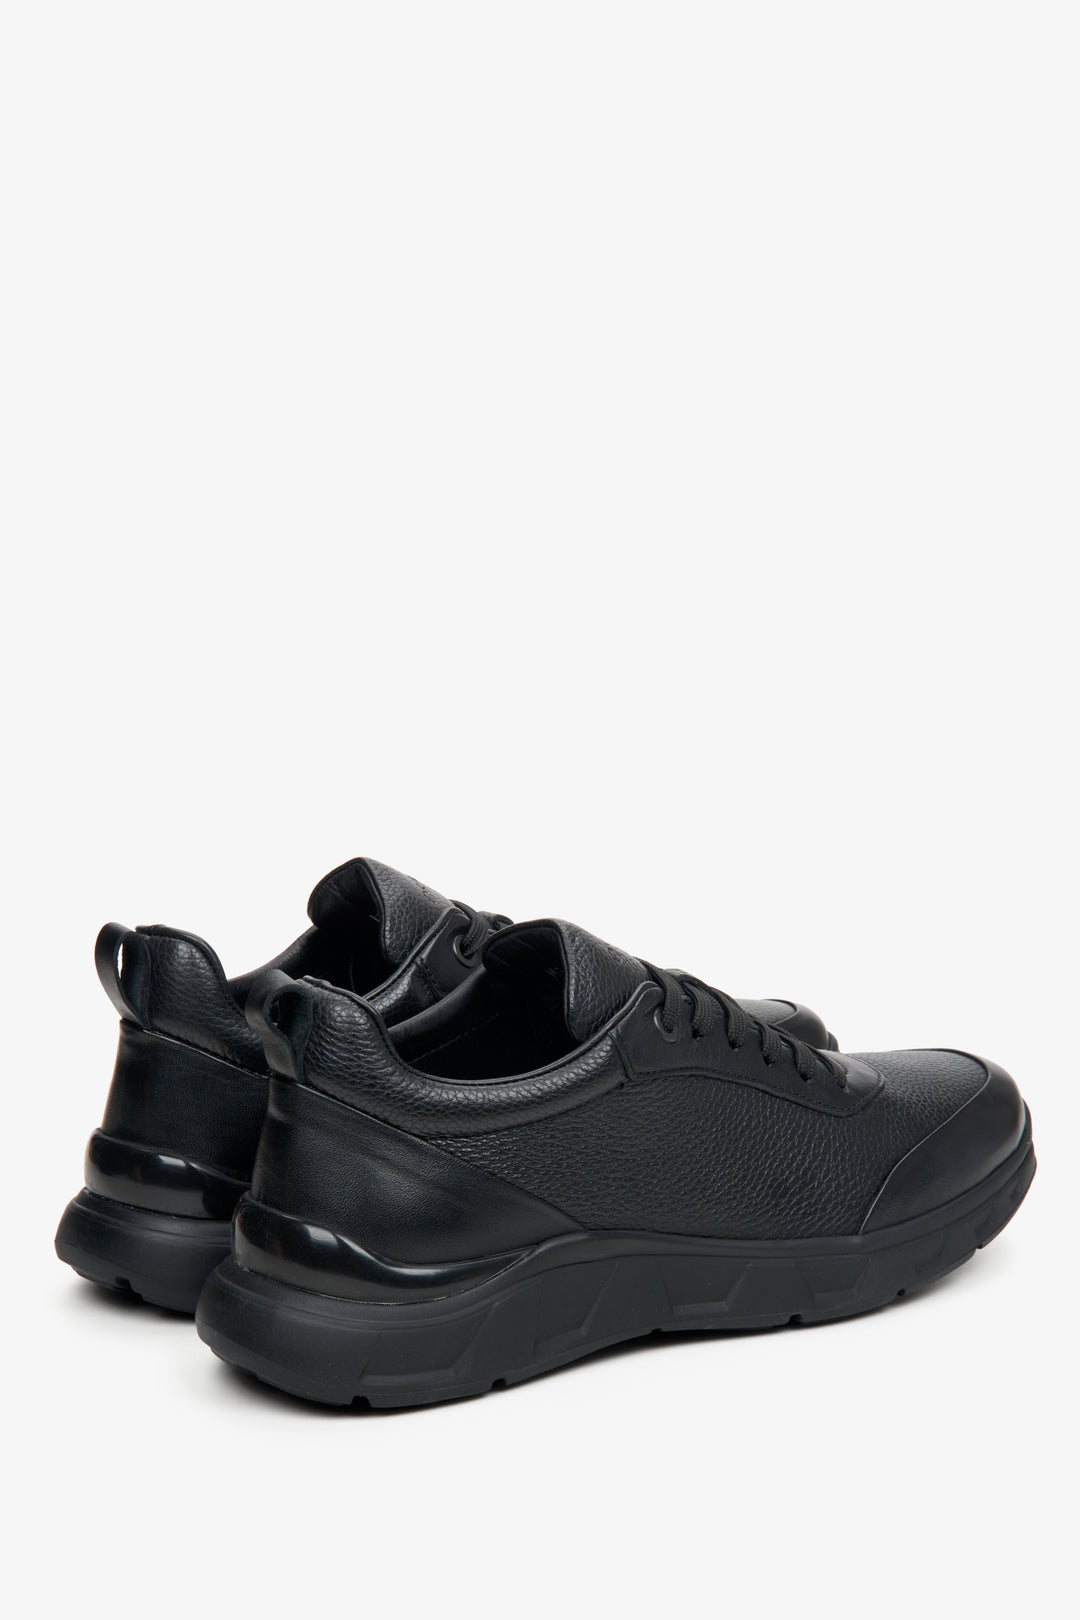 Men's black sneakers made of textured genuine leather by Estro - close-up on the side line and heel of the shoes.